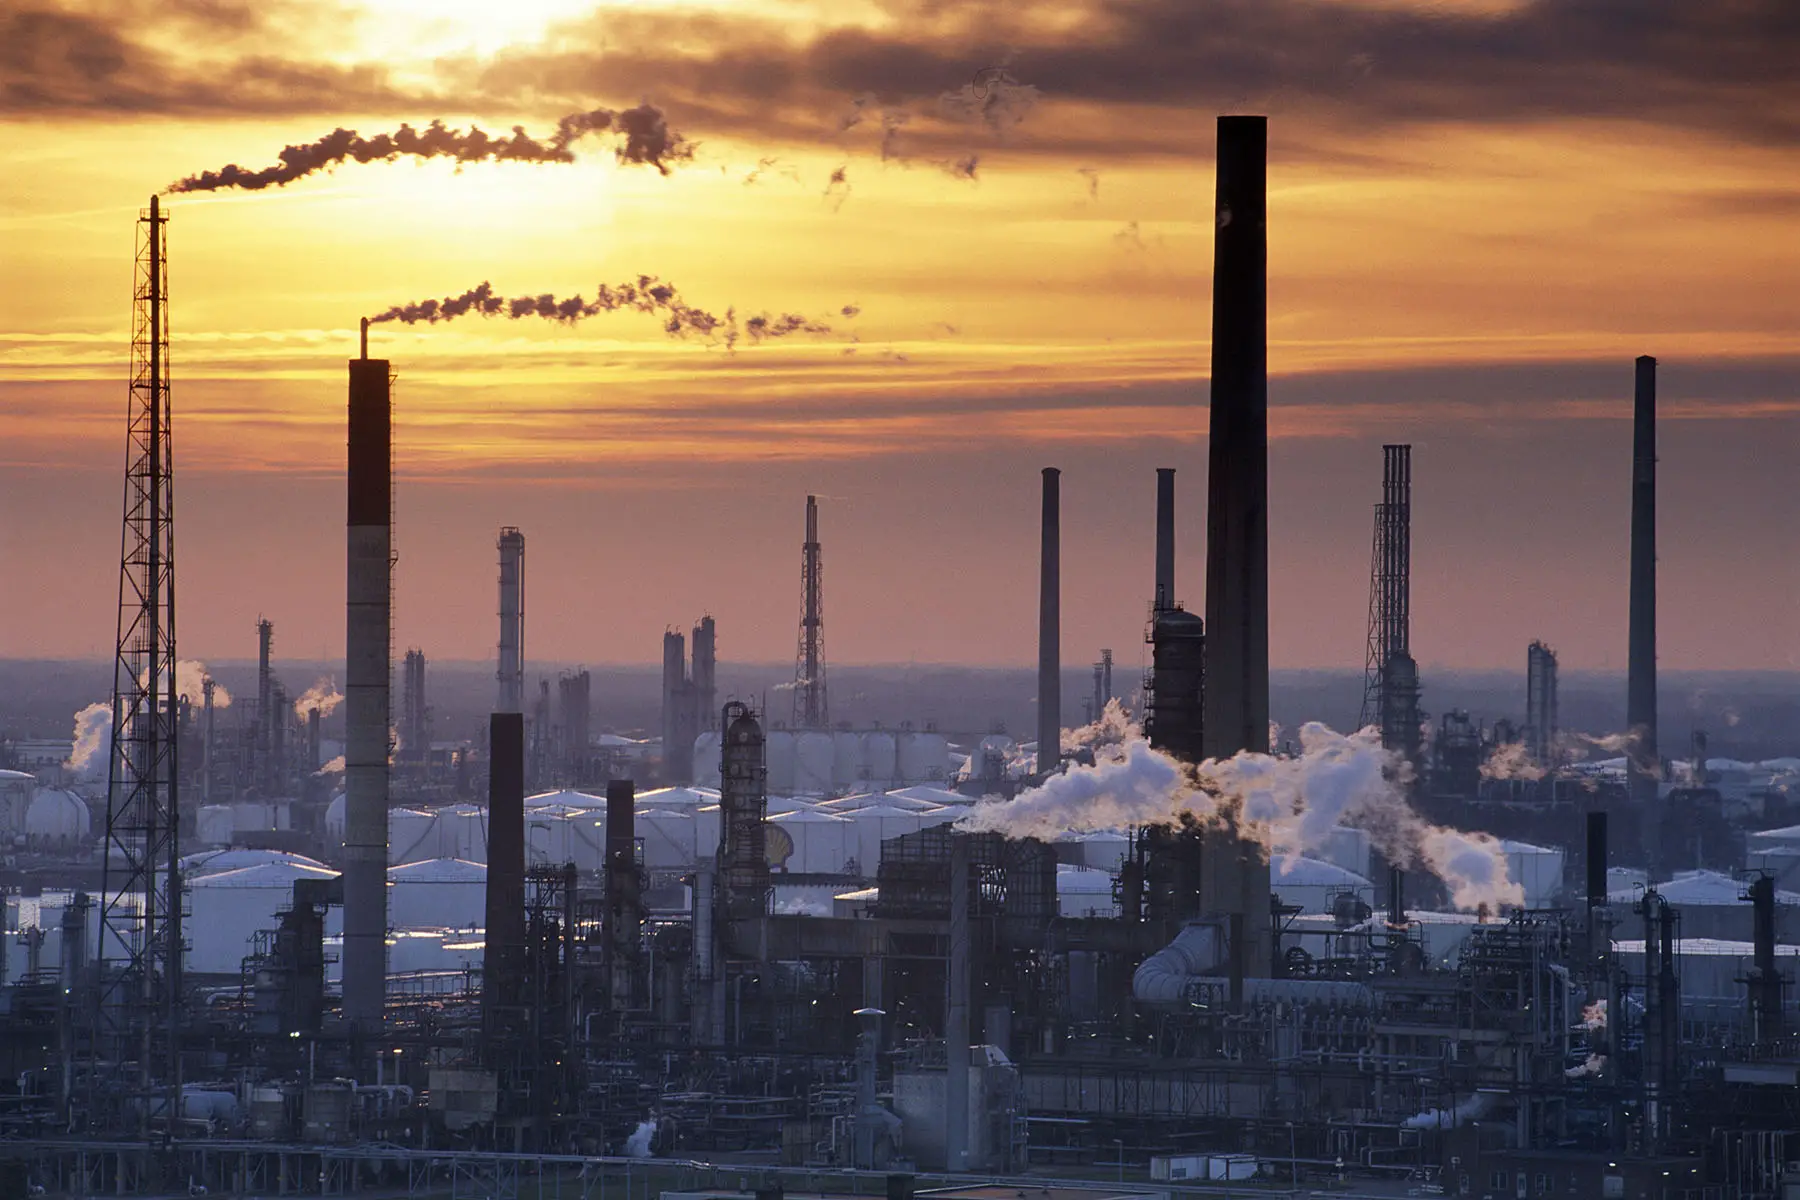 View of Shell refineries in Pernis, during dusk.